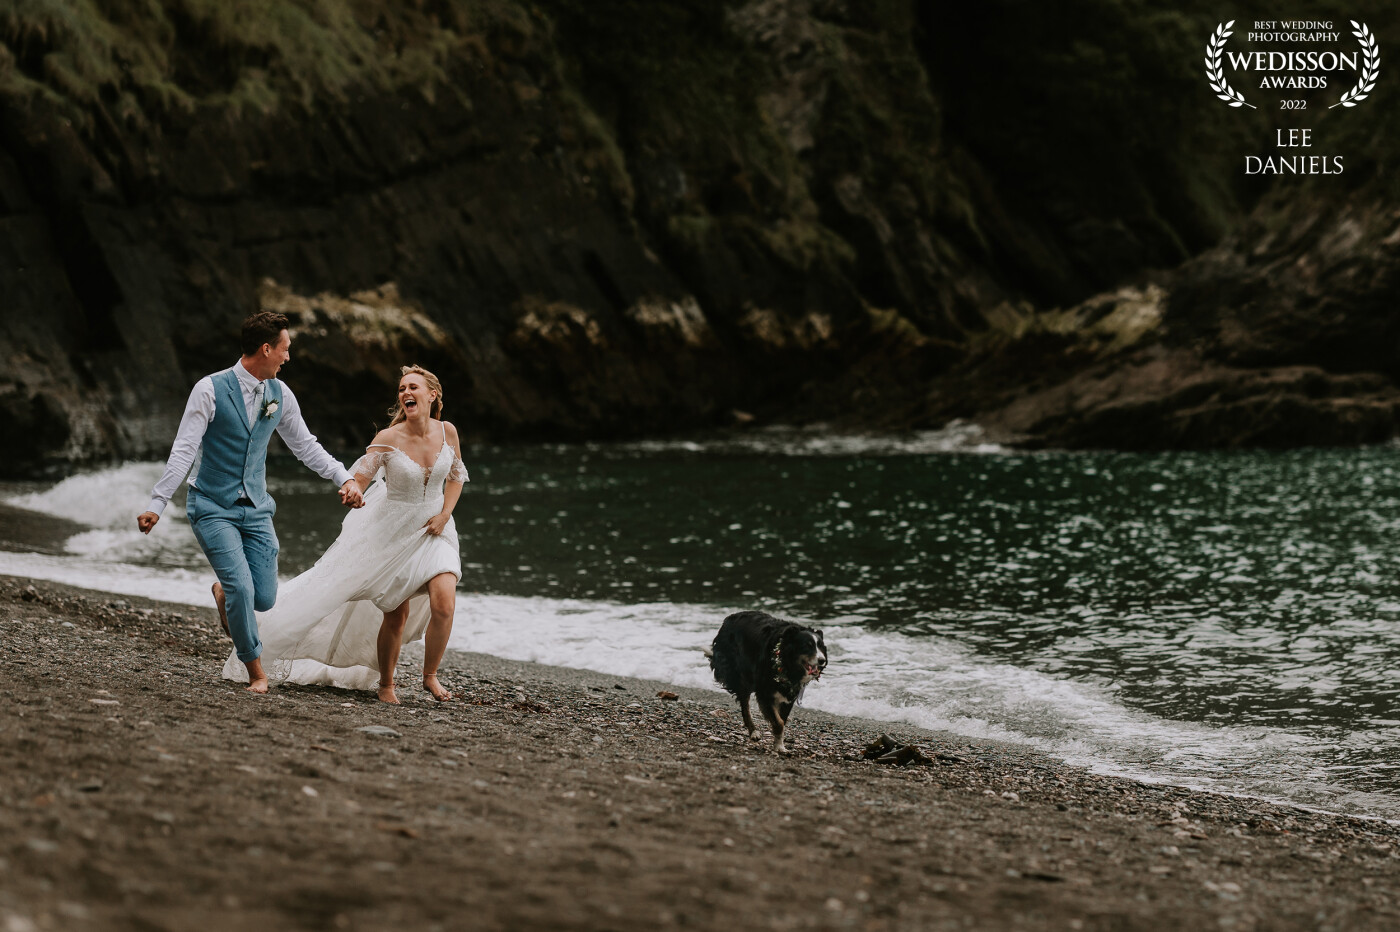 When Rachel & Josh asked me to capture their day in Devon, I jumped at the chance. The highlight of the wedding for me was heading to the beach with their dog Lilly, with every intention of playing in the sand and sea, and that's exactly what we did!<br />
<br />
Venue - Sandy Cove